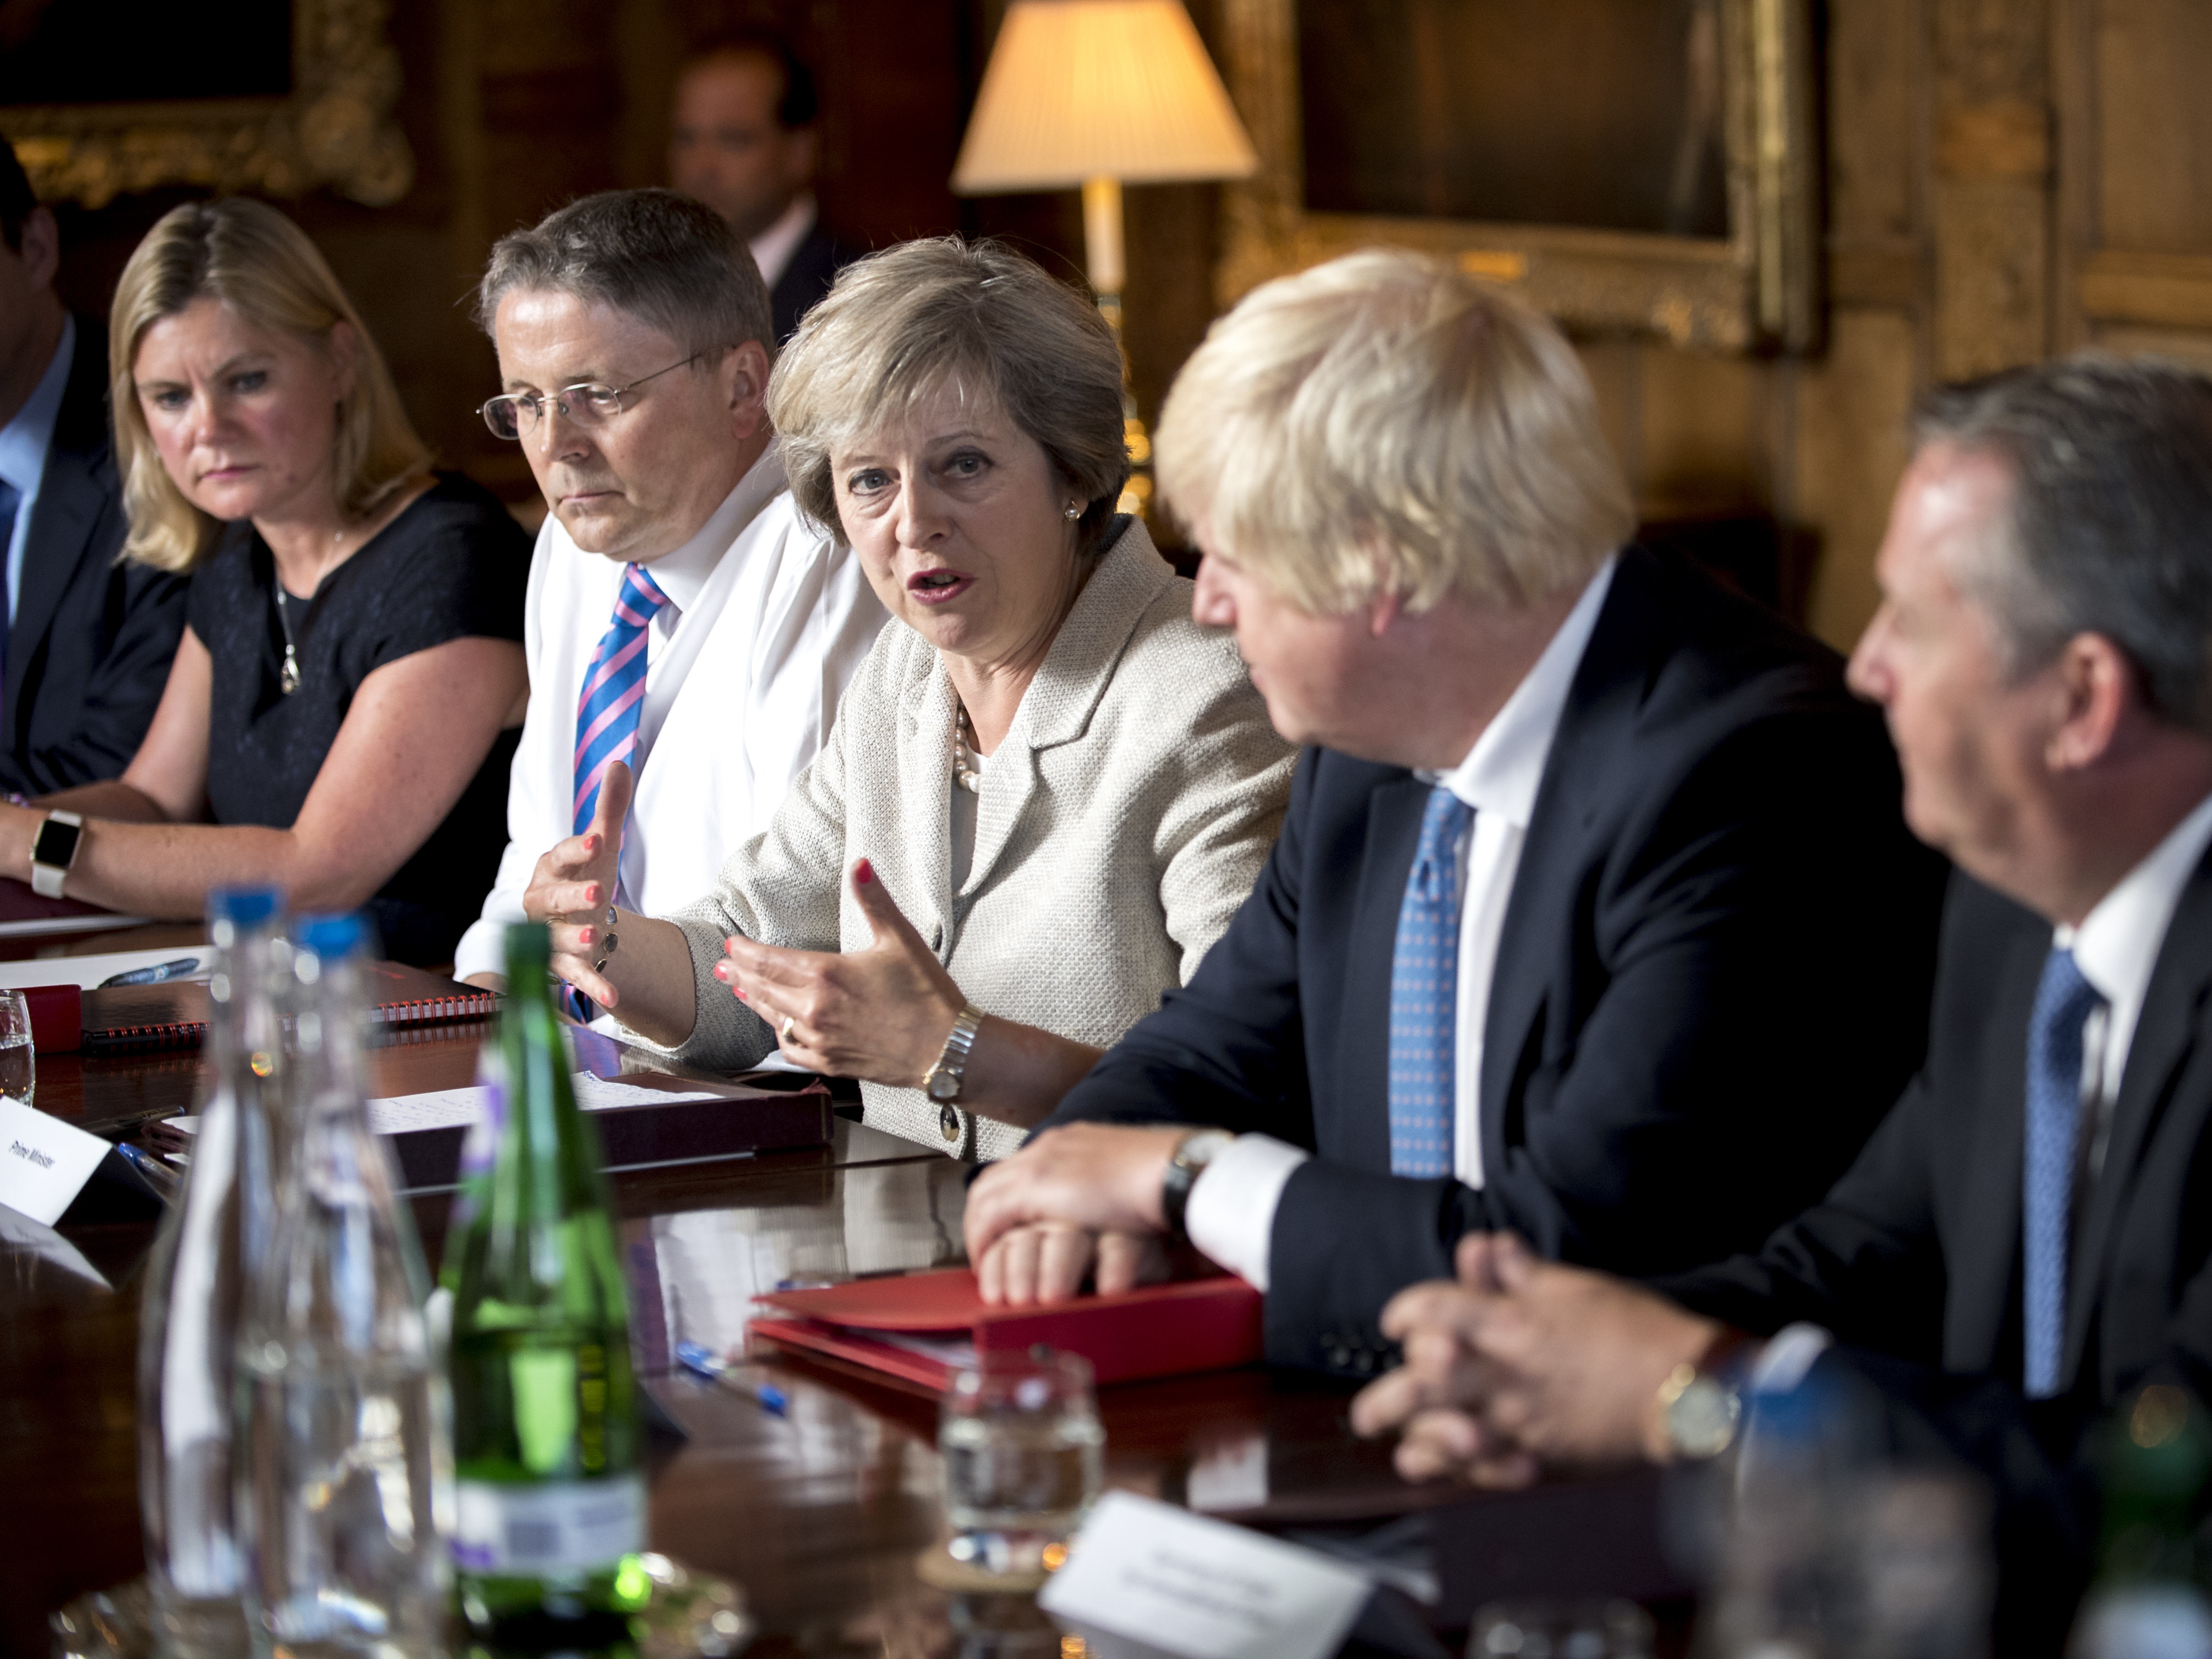 Theresa May, Prime Minister of the UK, and her new cabinet–including Boris Johnson, the former Mayor of London, (to her left)–will be in charge of negotiating Brexit with the European Union